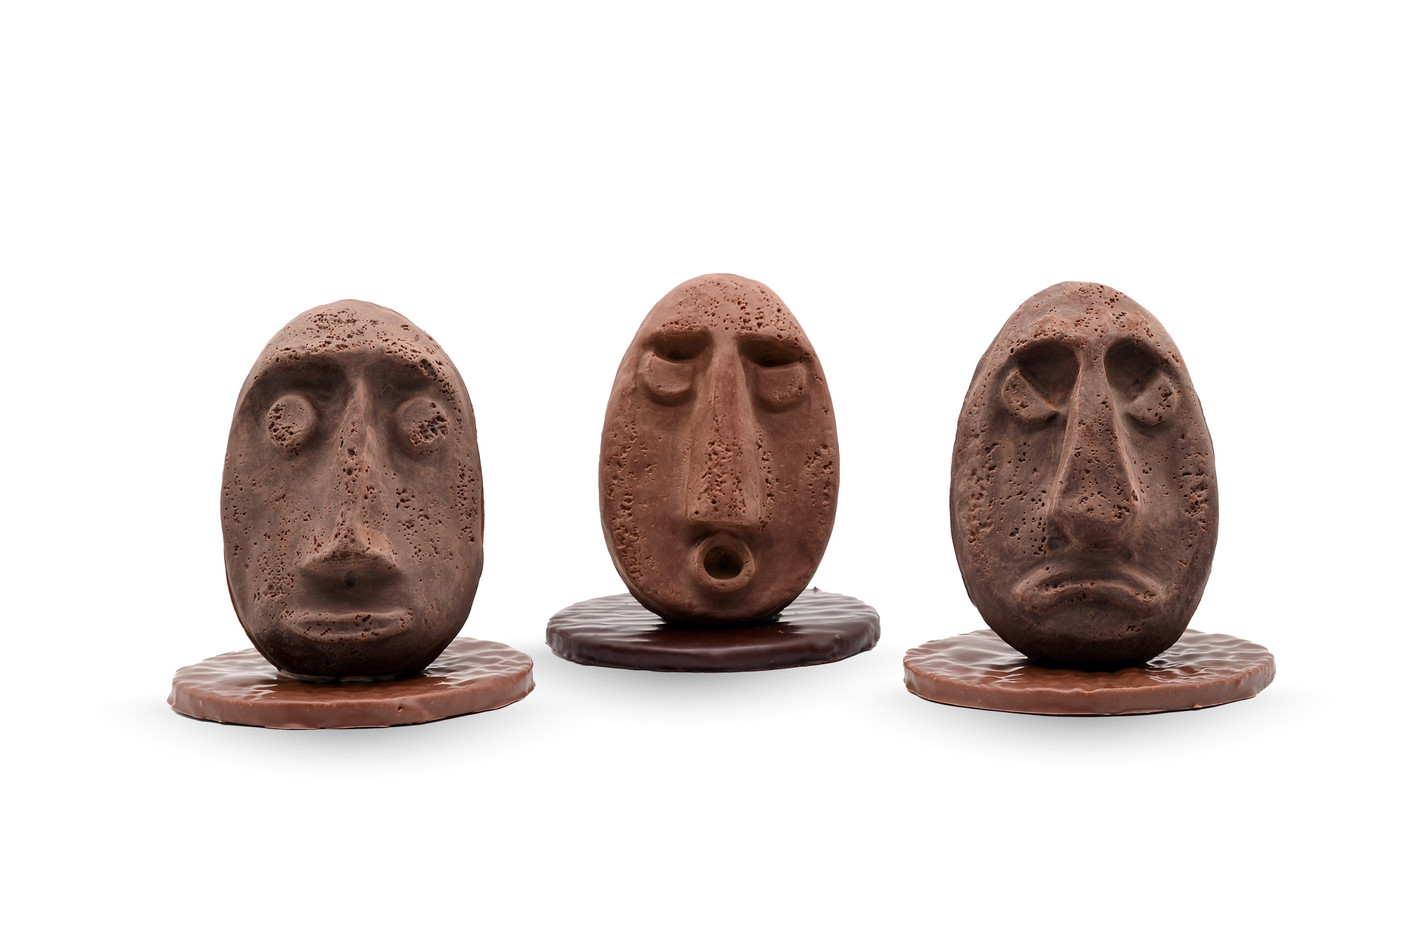 In addition to the traditional Easter mouldings, Chocolats du Cœur is playing the bold card with these typical Easter Island statuettes. Photo: Ateliers du Tricentenaire